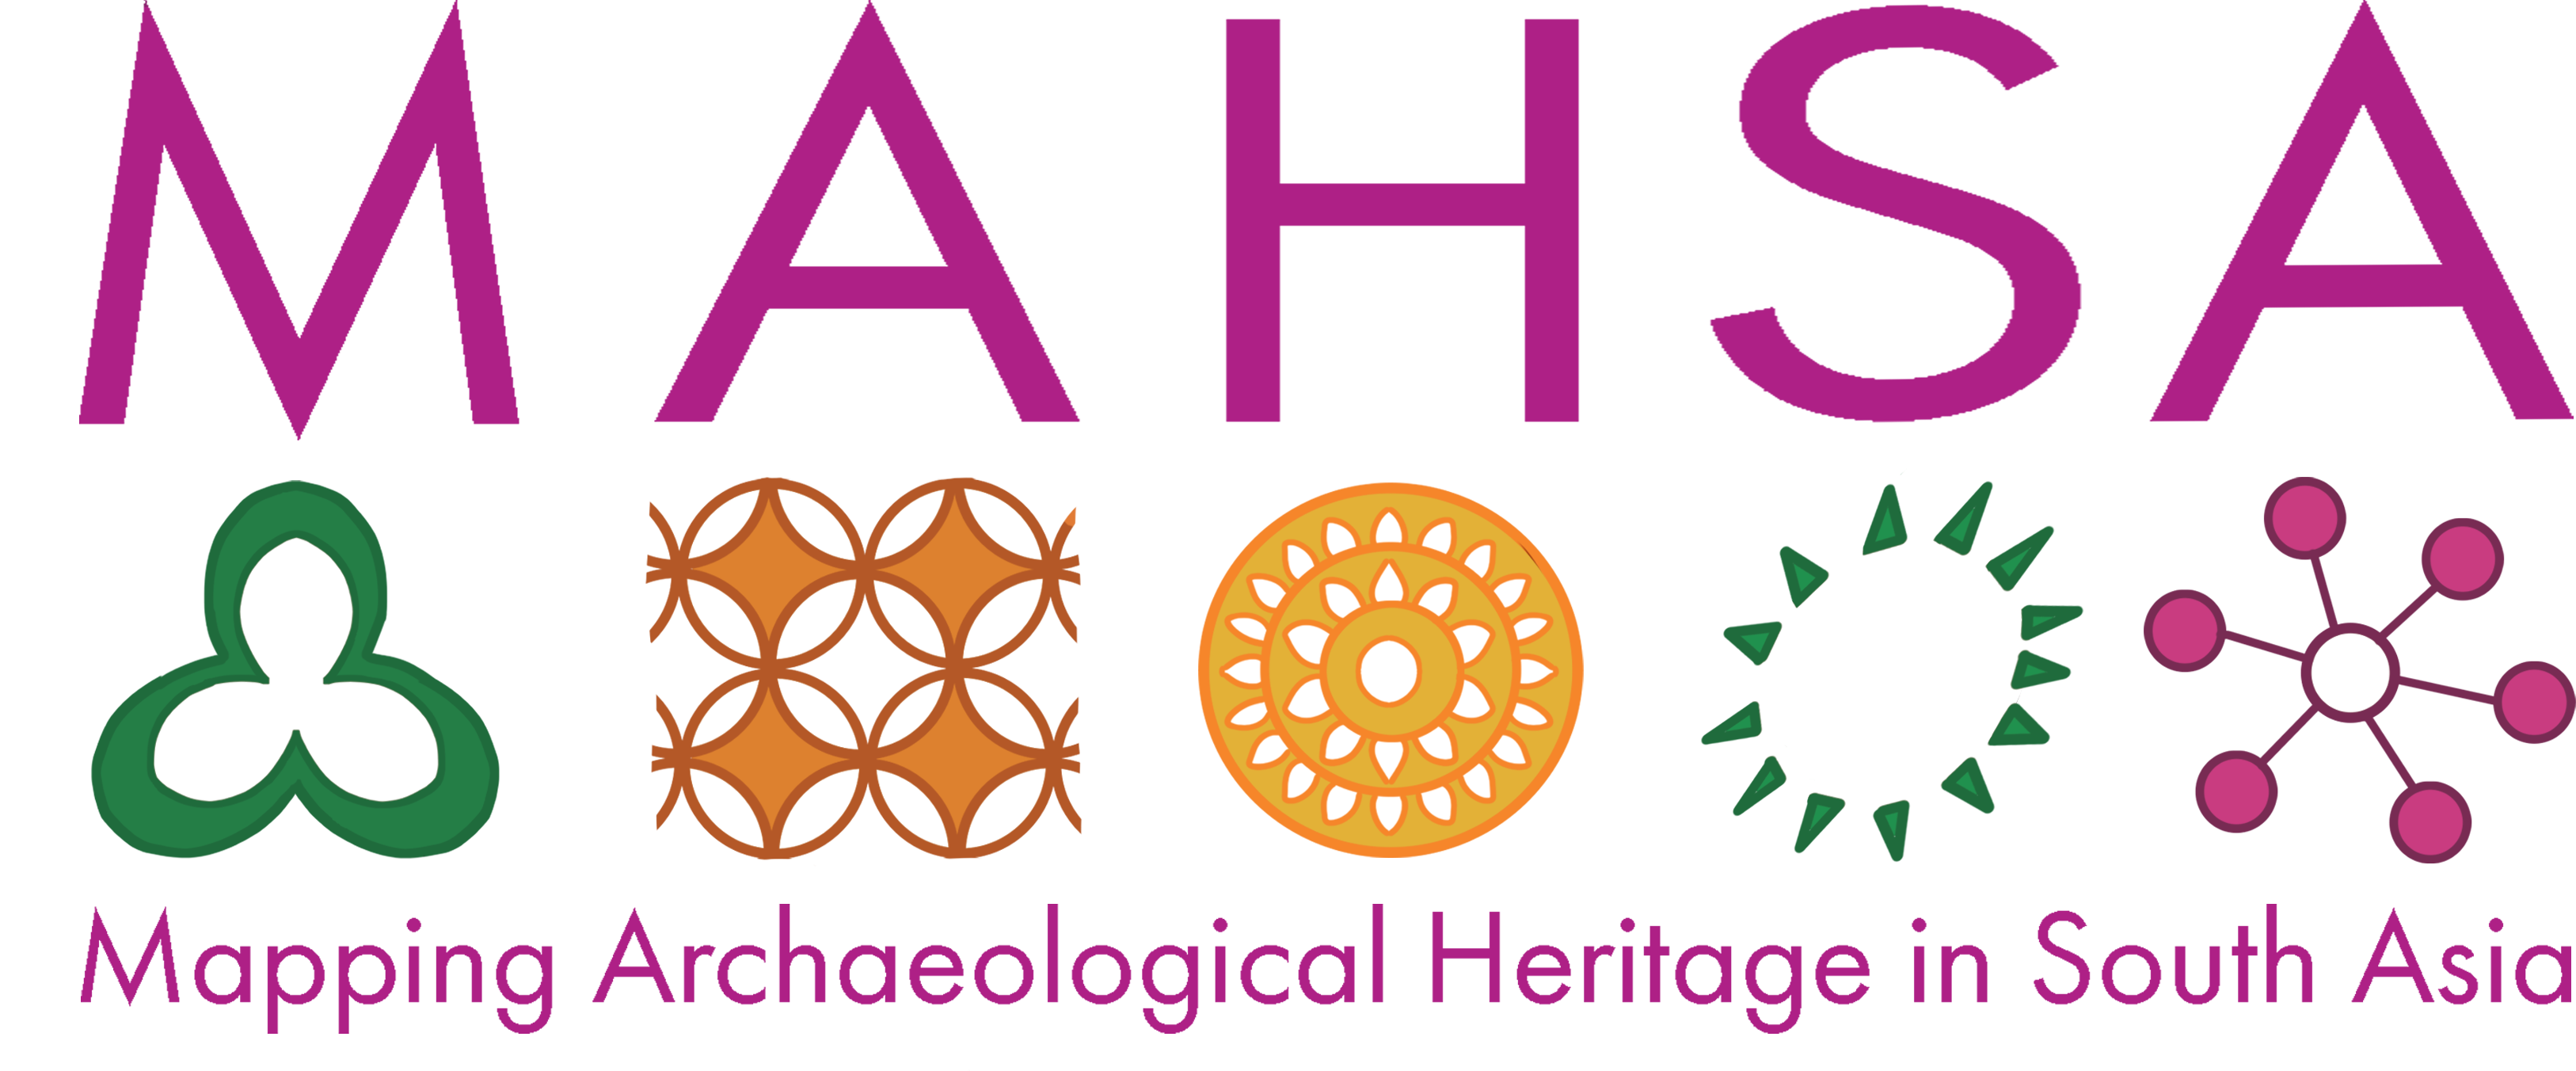 Mapping Archaeological Heritage in South Asia